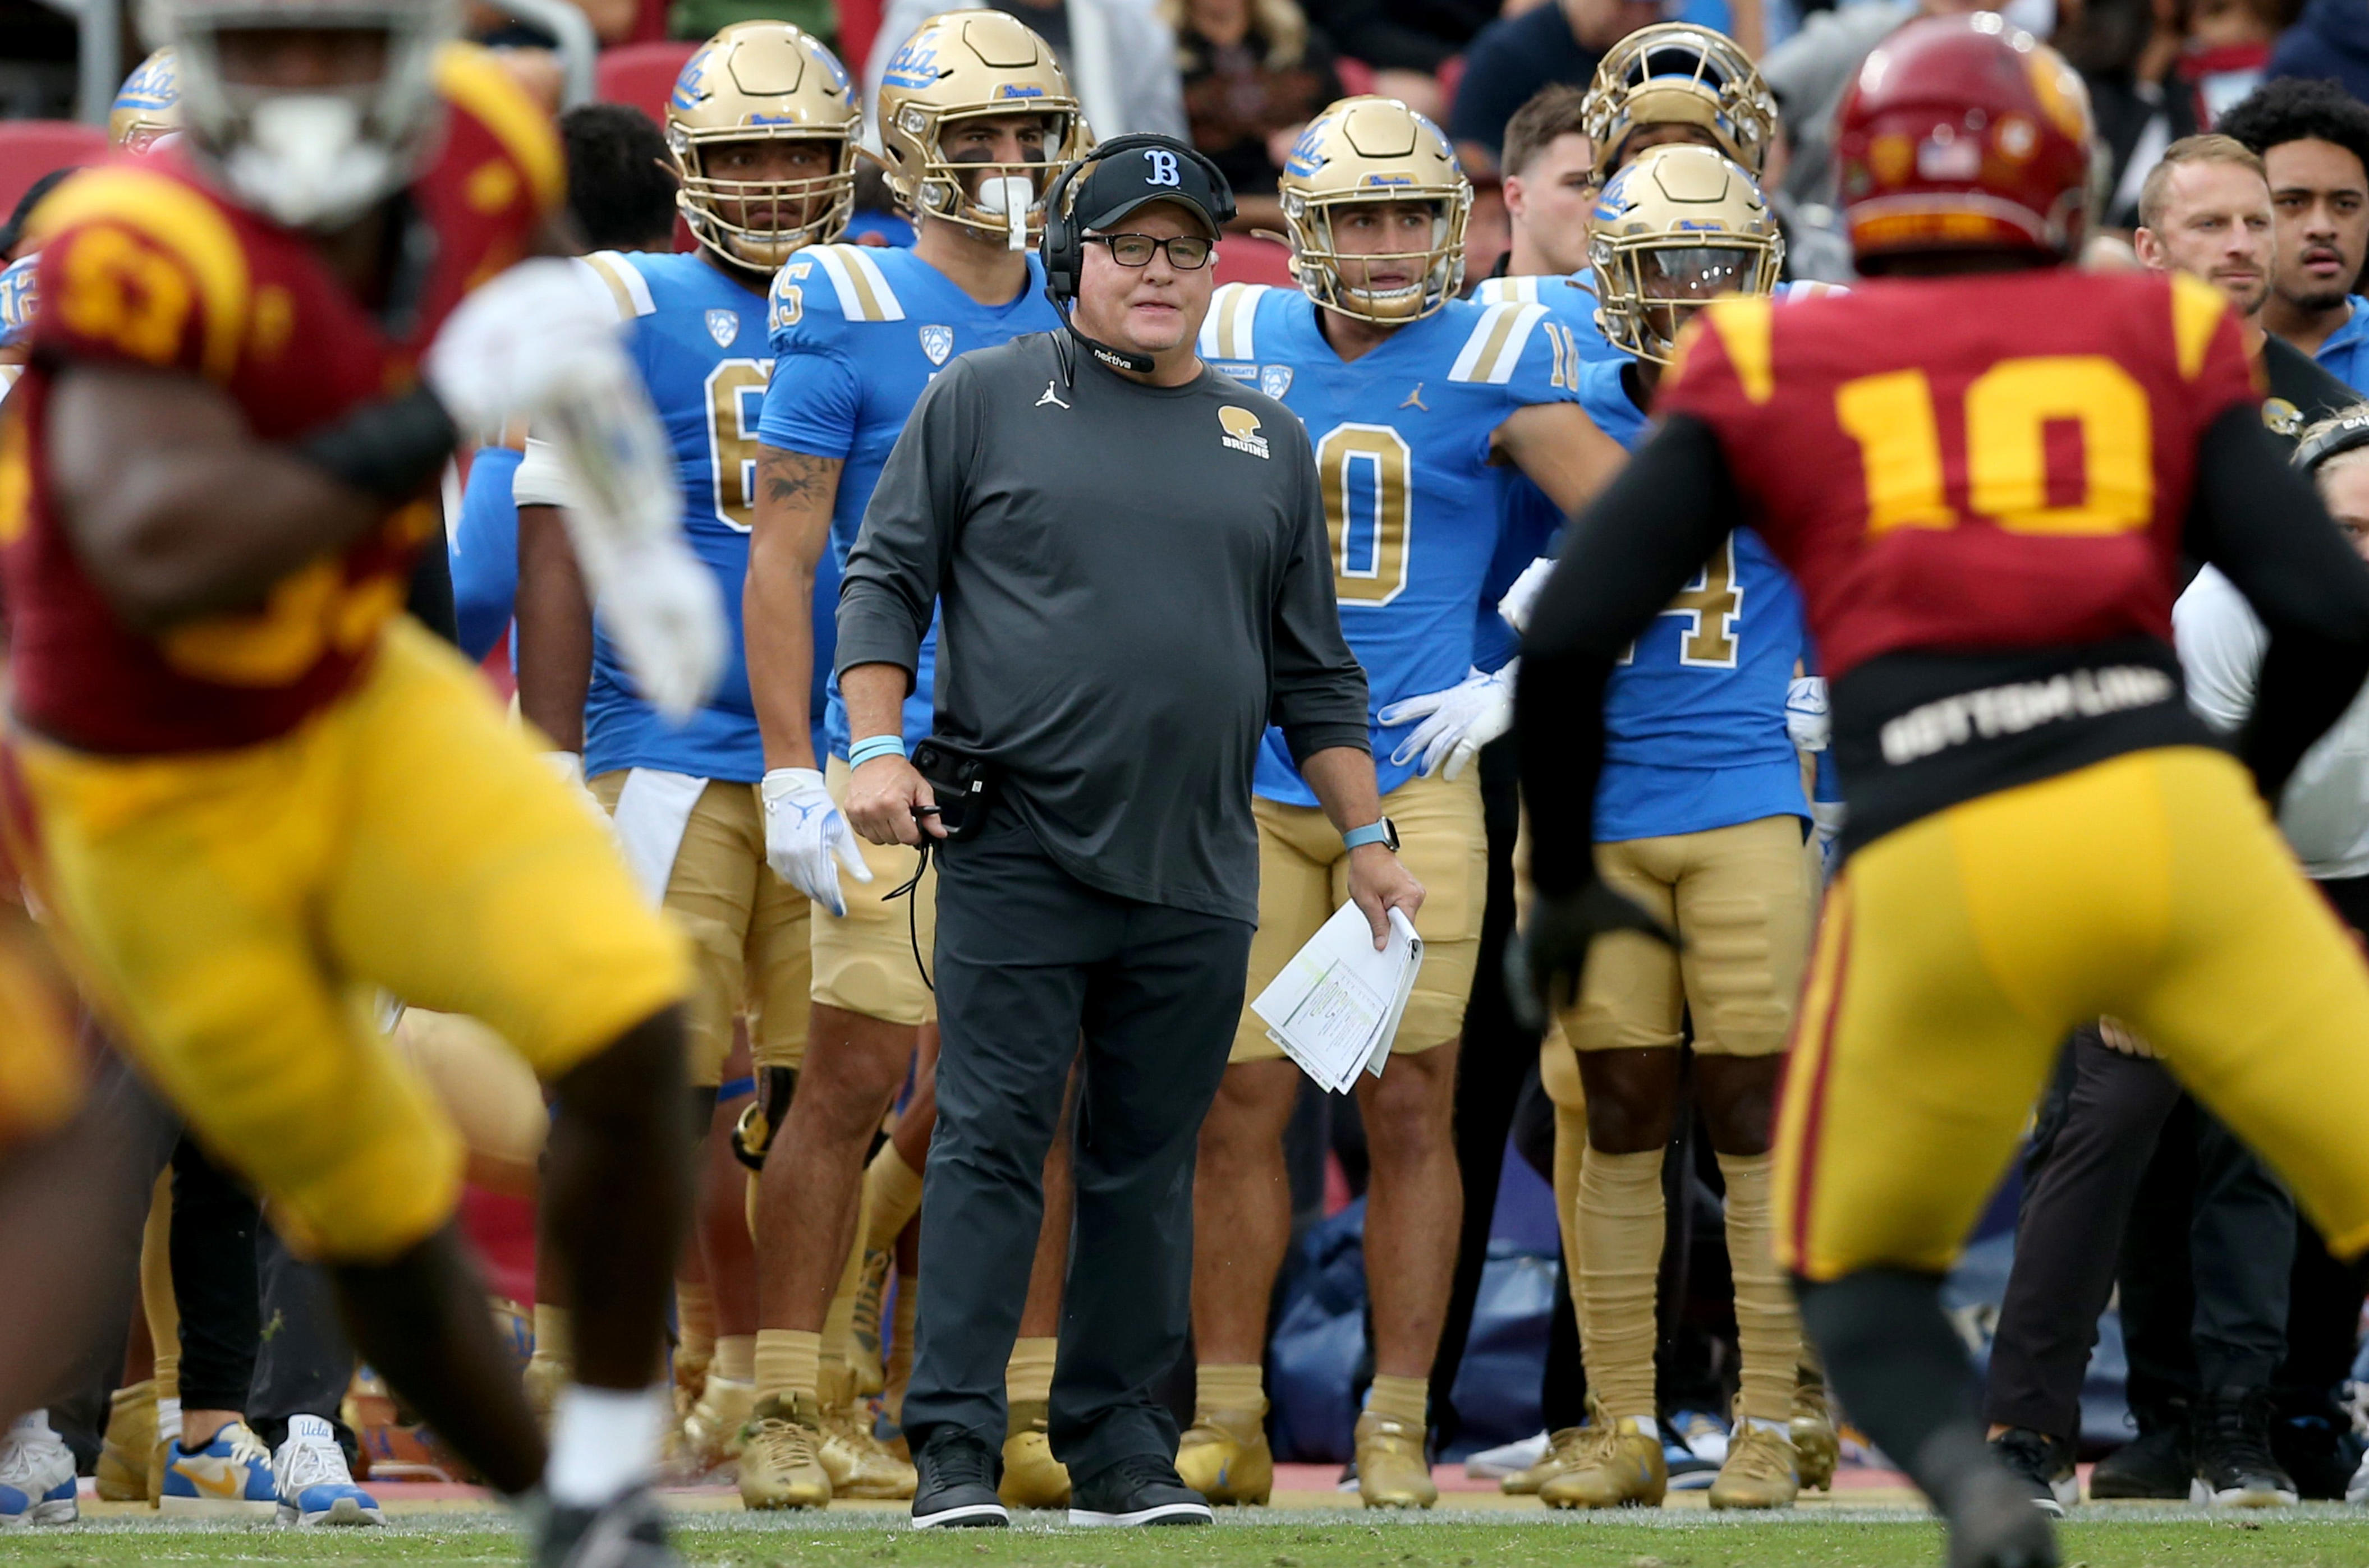 chip kelly leaving ucla football, expected to become ohio state coordinator, per reports